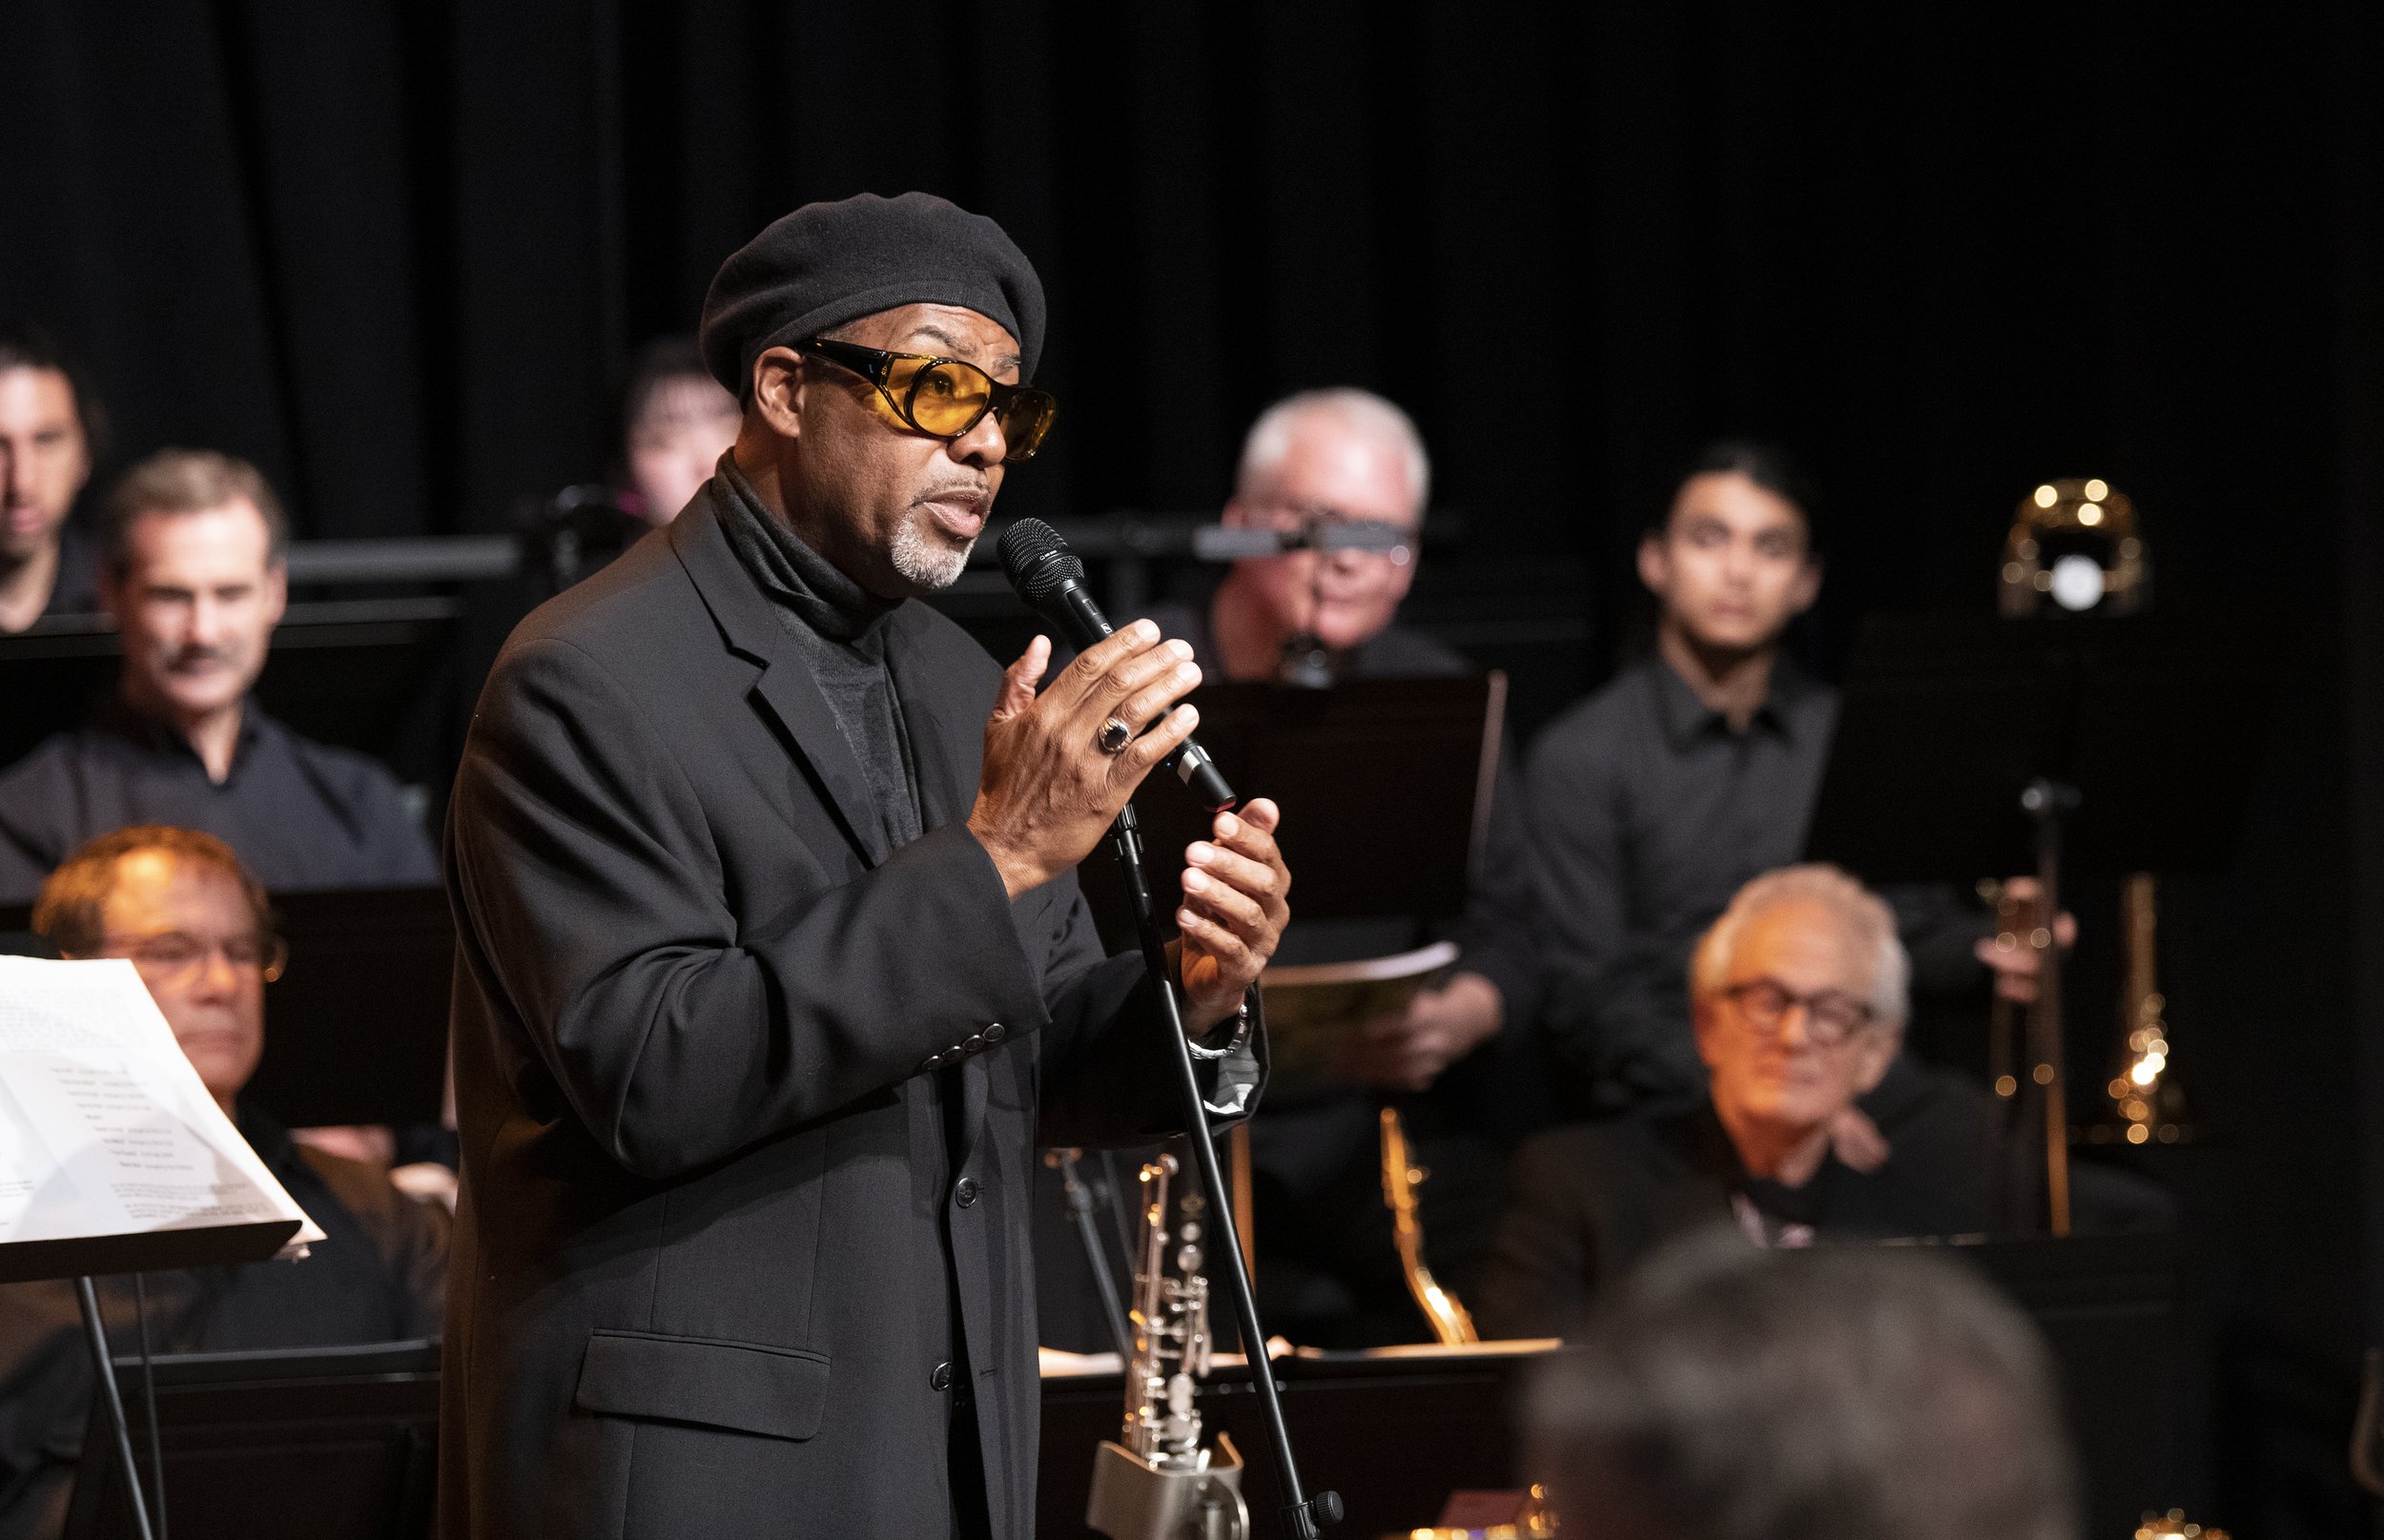  Santa Monica College Music Department Jazz Ensemble Tribute to Innovator Composer Saxophonist Wayne Shorter Monday, May 22 ,2023 at the Music Hall Santa Monica College Performing Art’s Center with Conductor: Frederick Keith Fiddmont and Special Gues